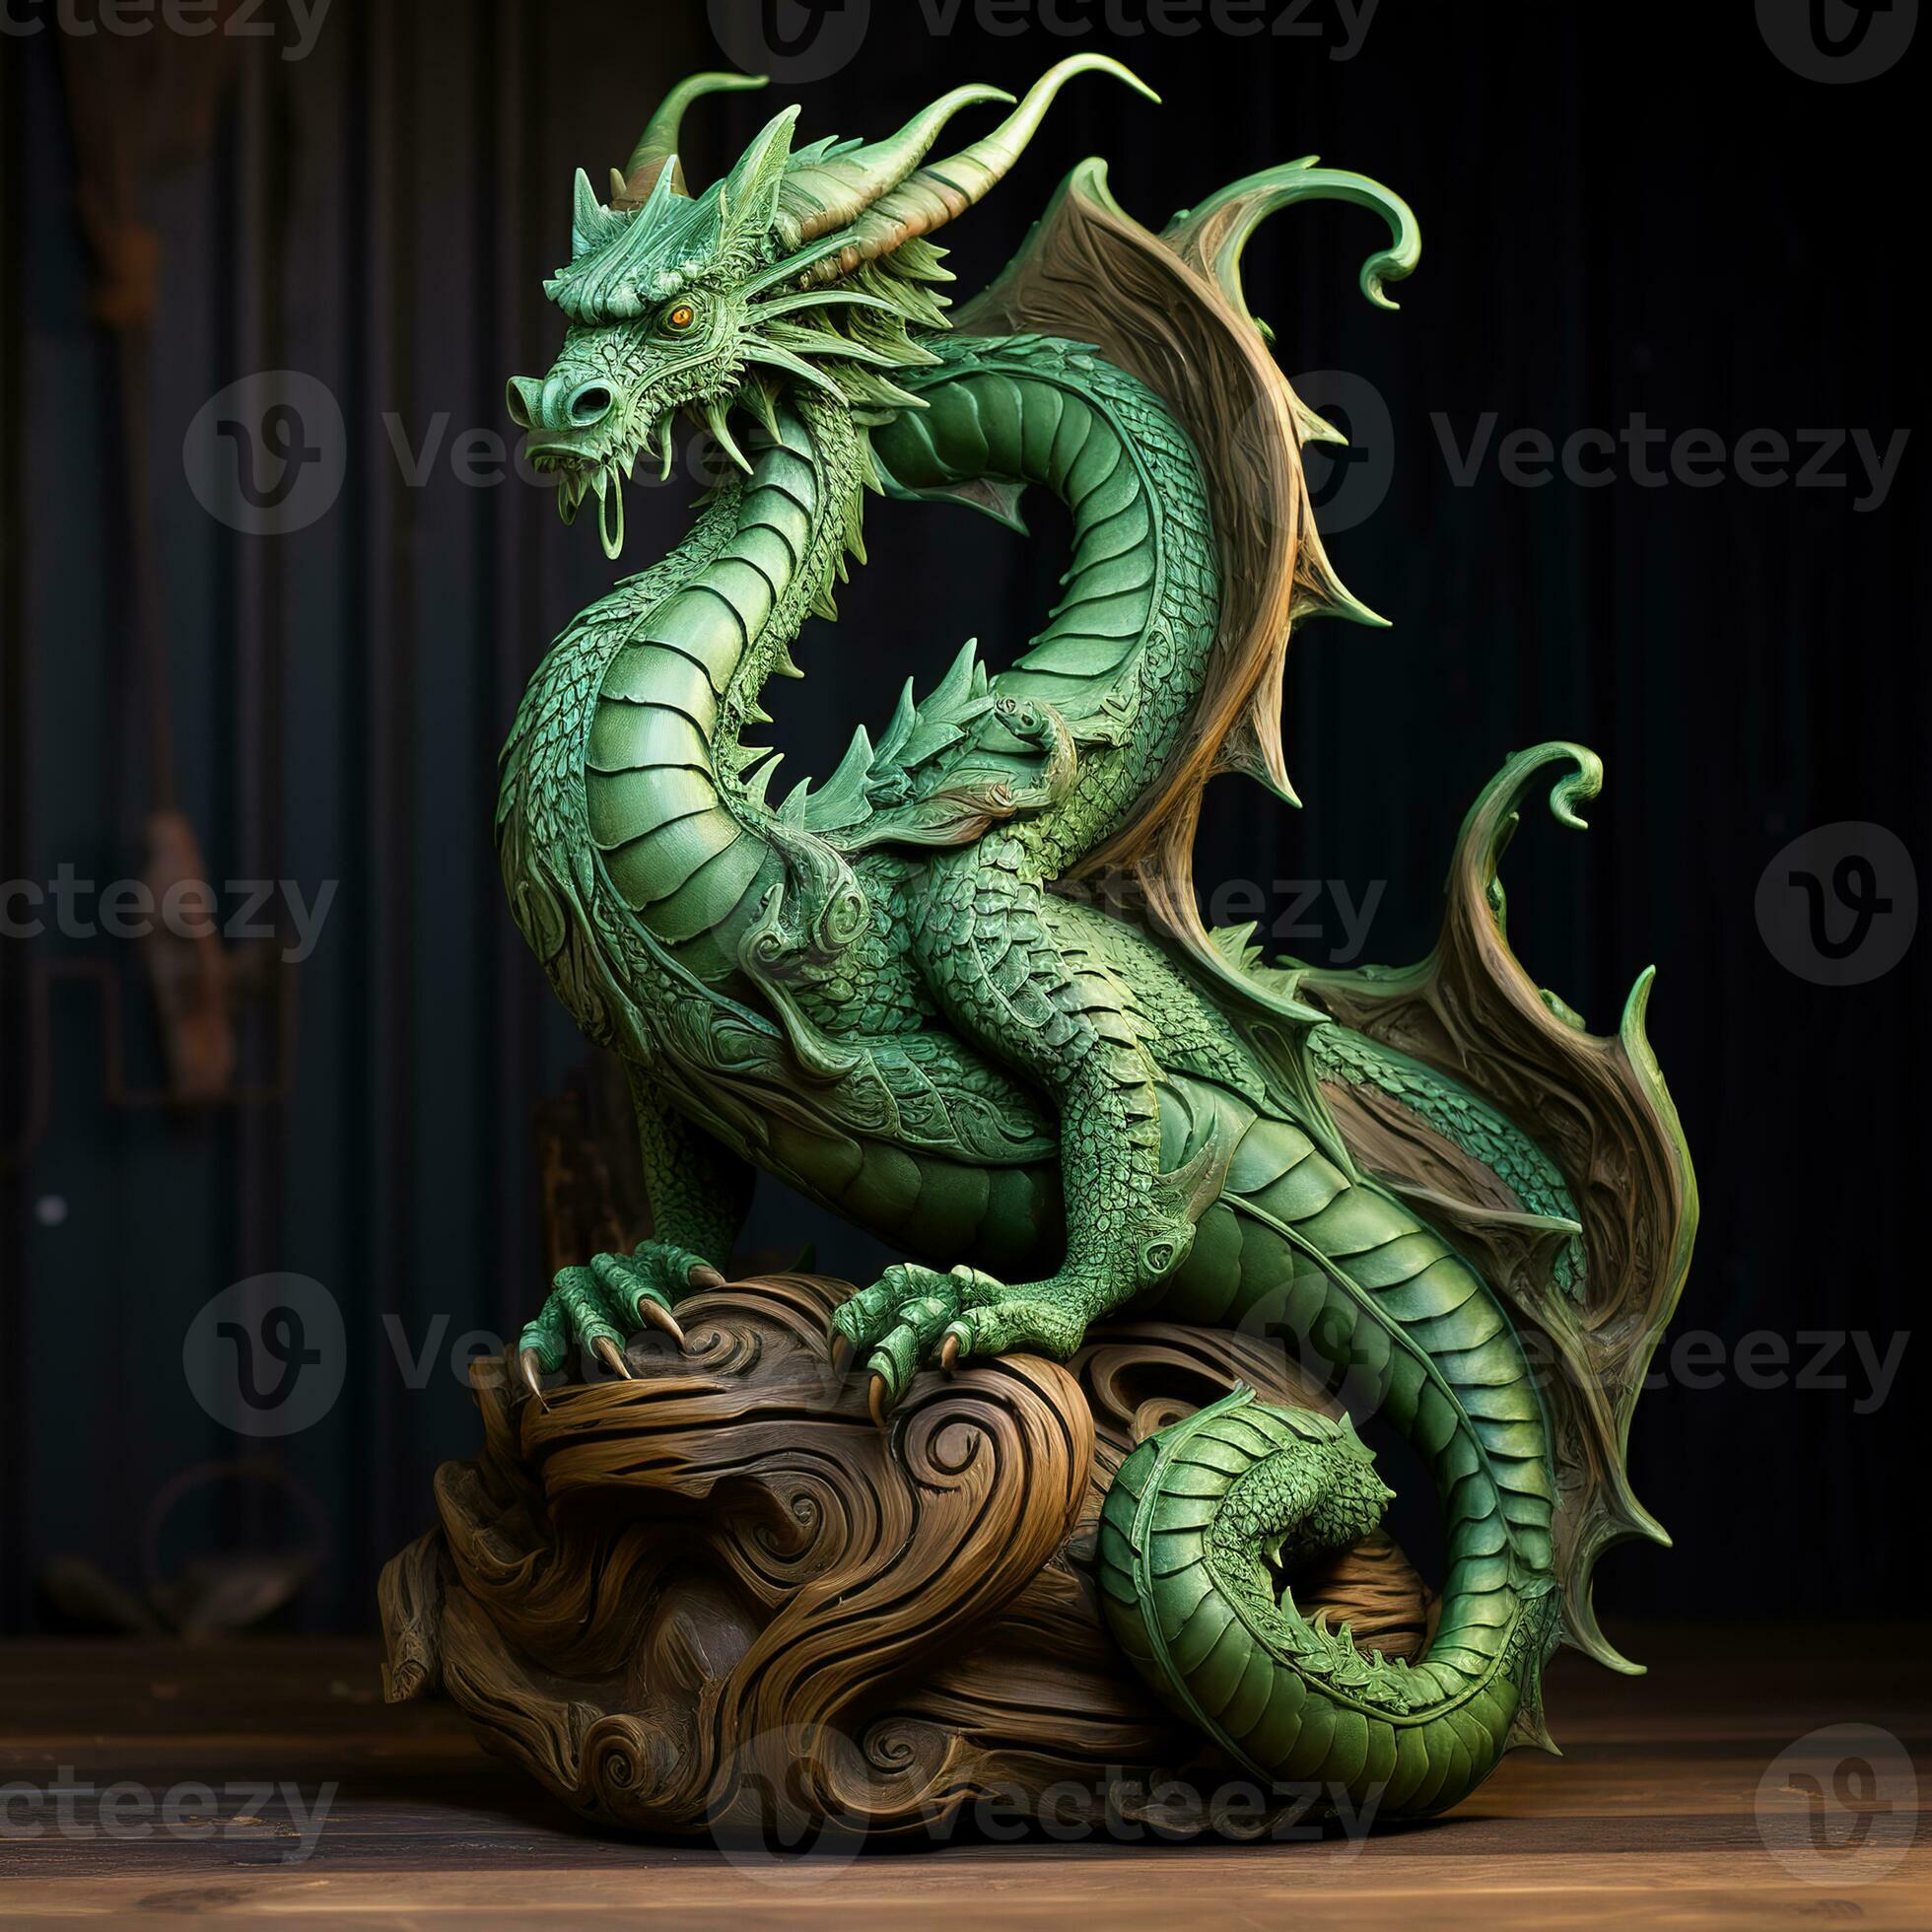 https://static.vecteezy.com/system/resources/previews/027/594/681/large_2x/green-wooden-dragon-new-year-2024-photo.jpg